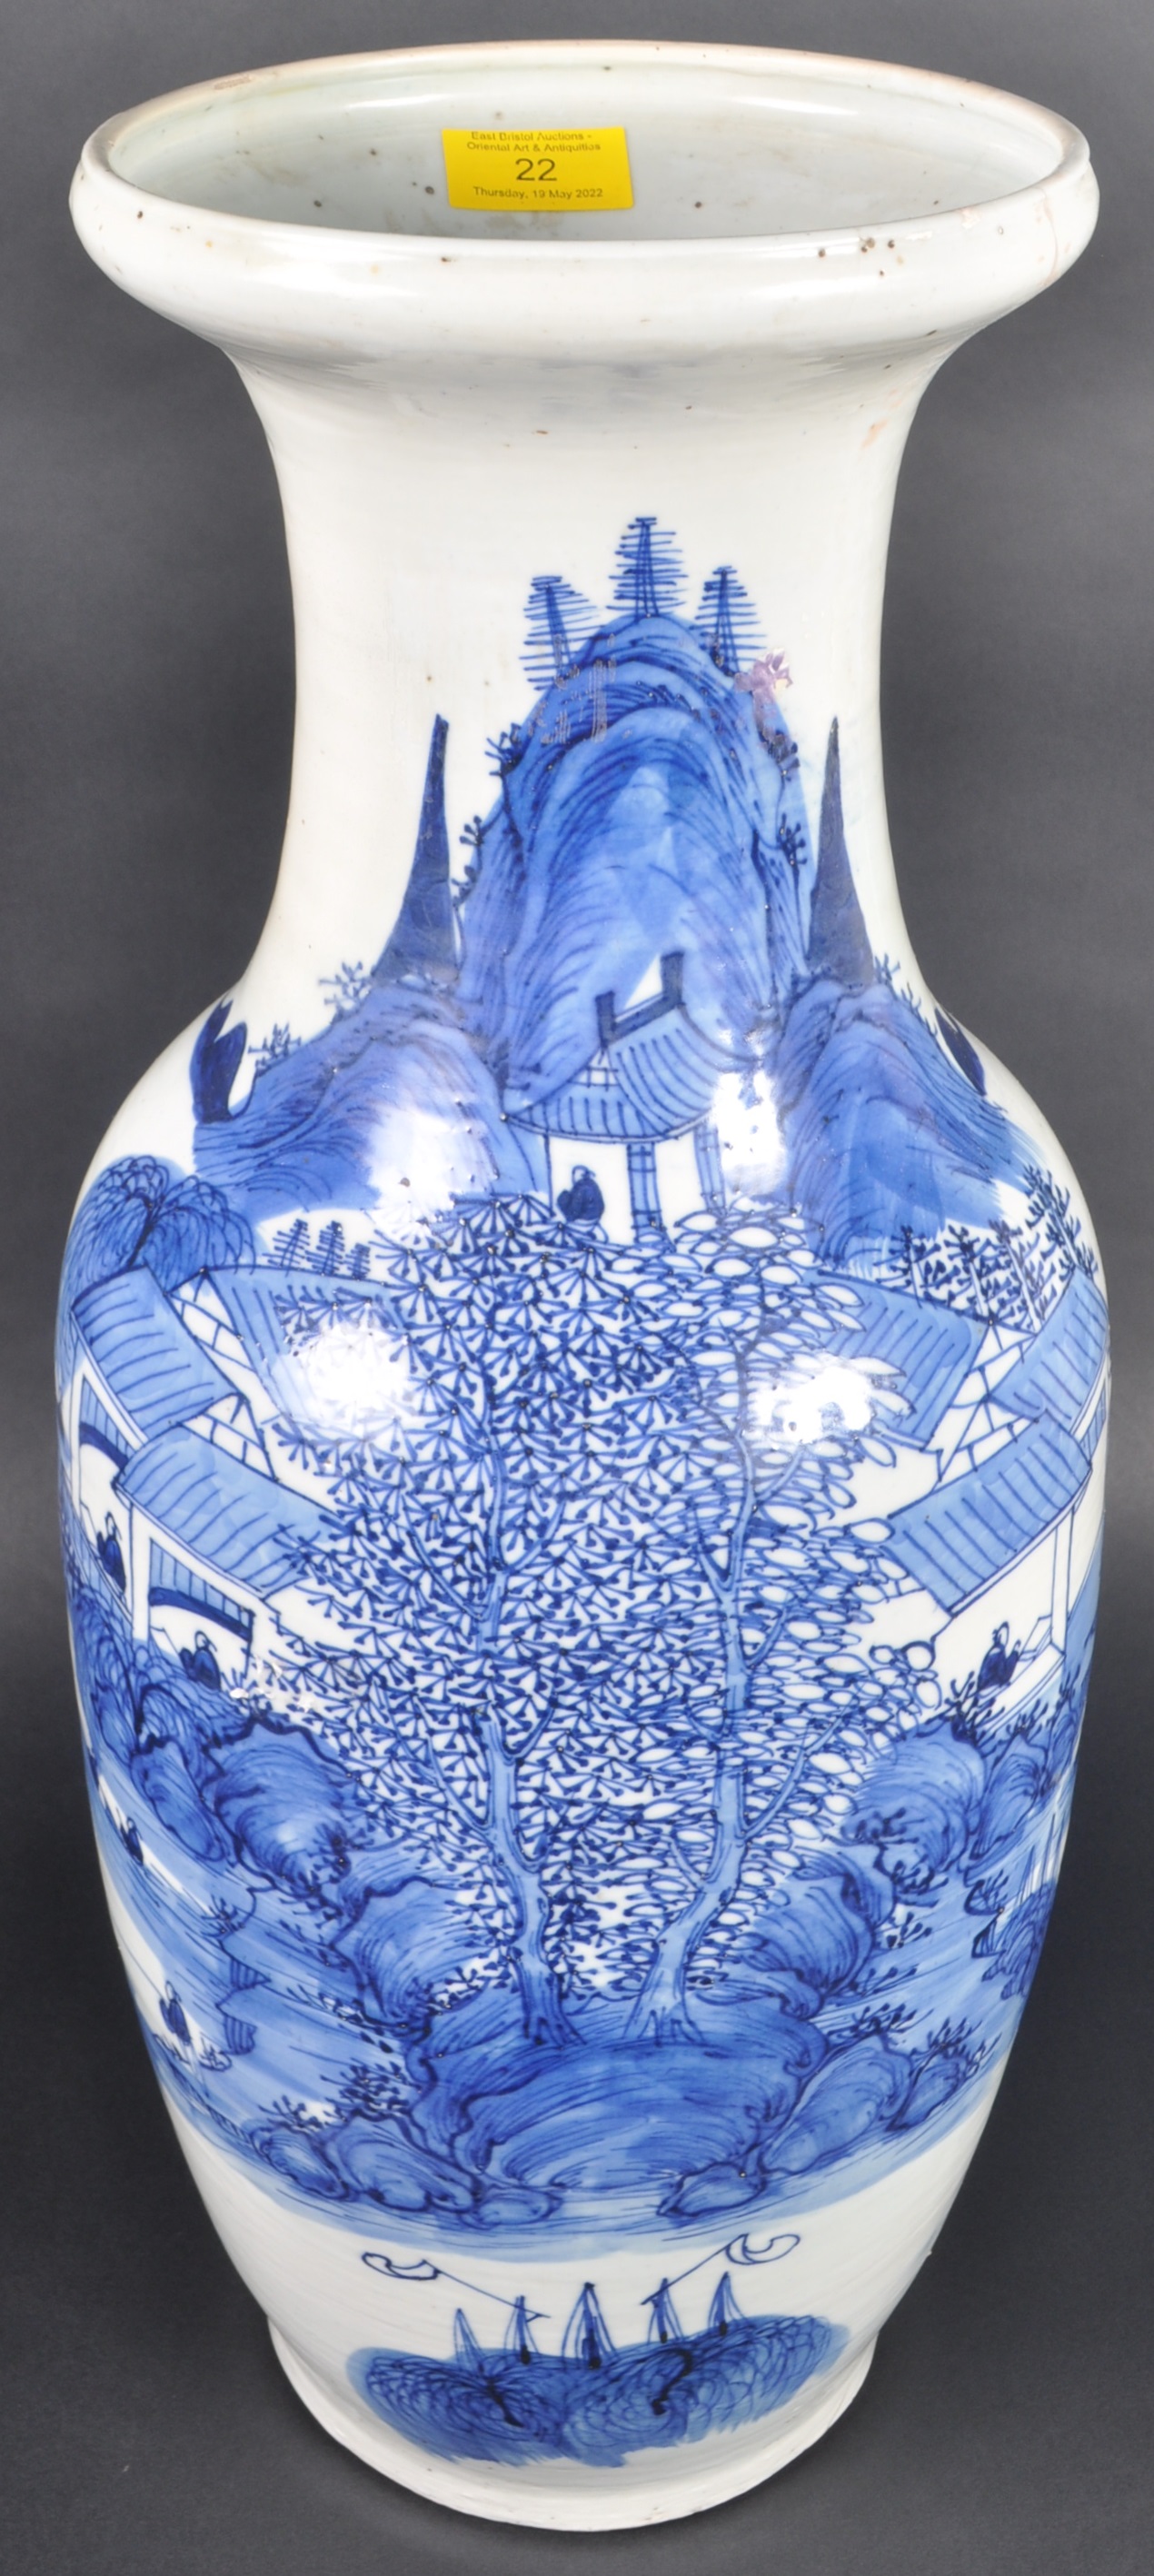 LARGE 19TH CENTURY CHINESE QING DYNASTY BLUE AND WHITE VASE - Image 2 of 12